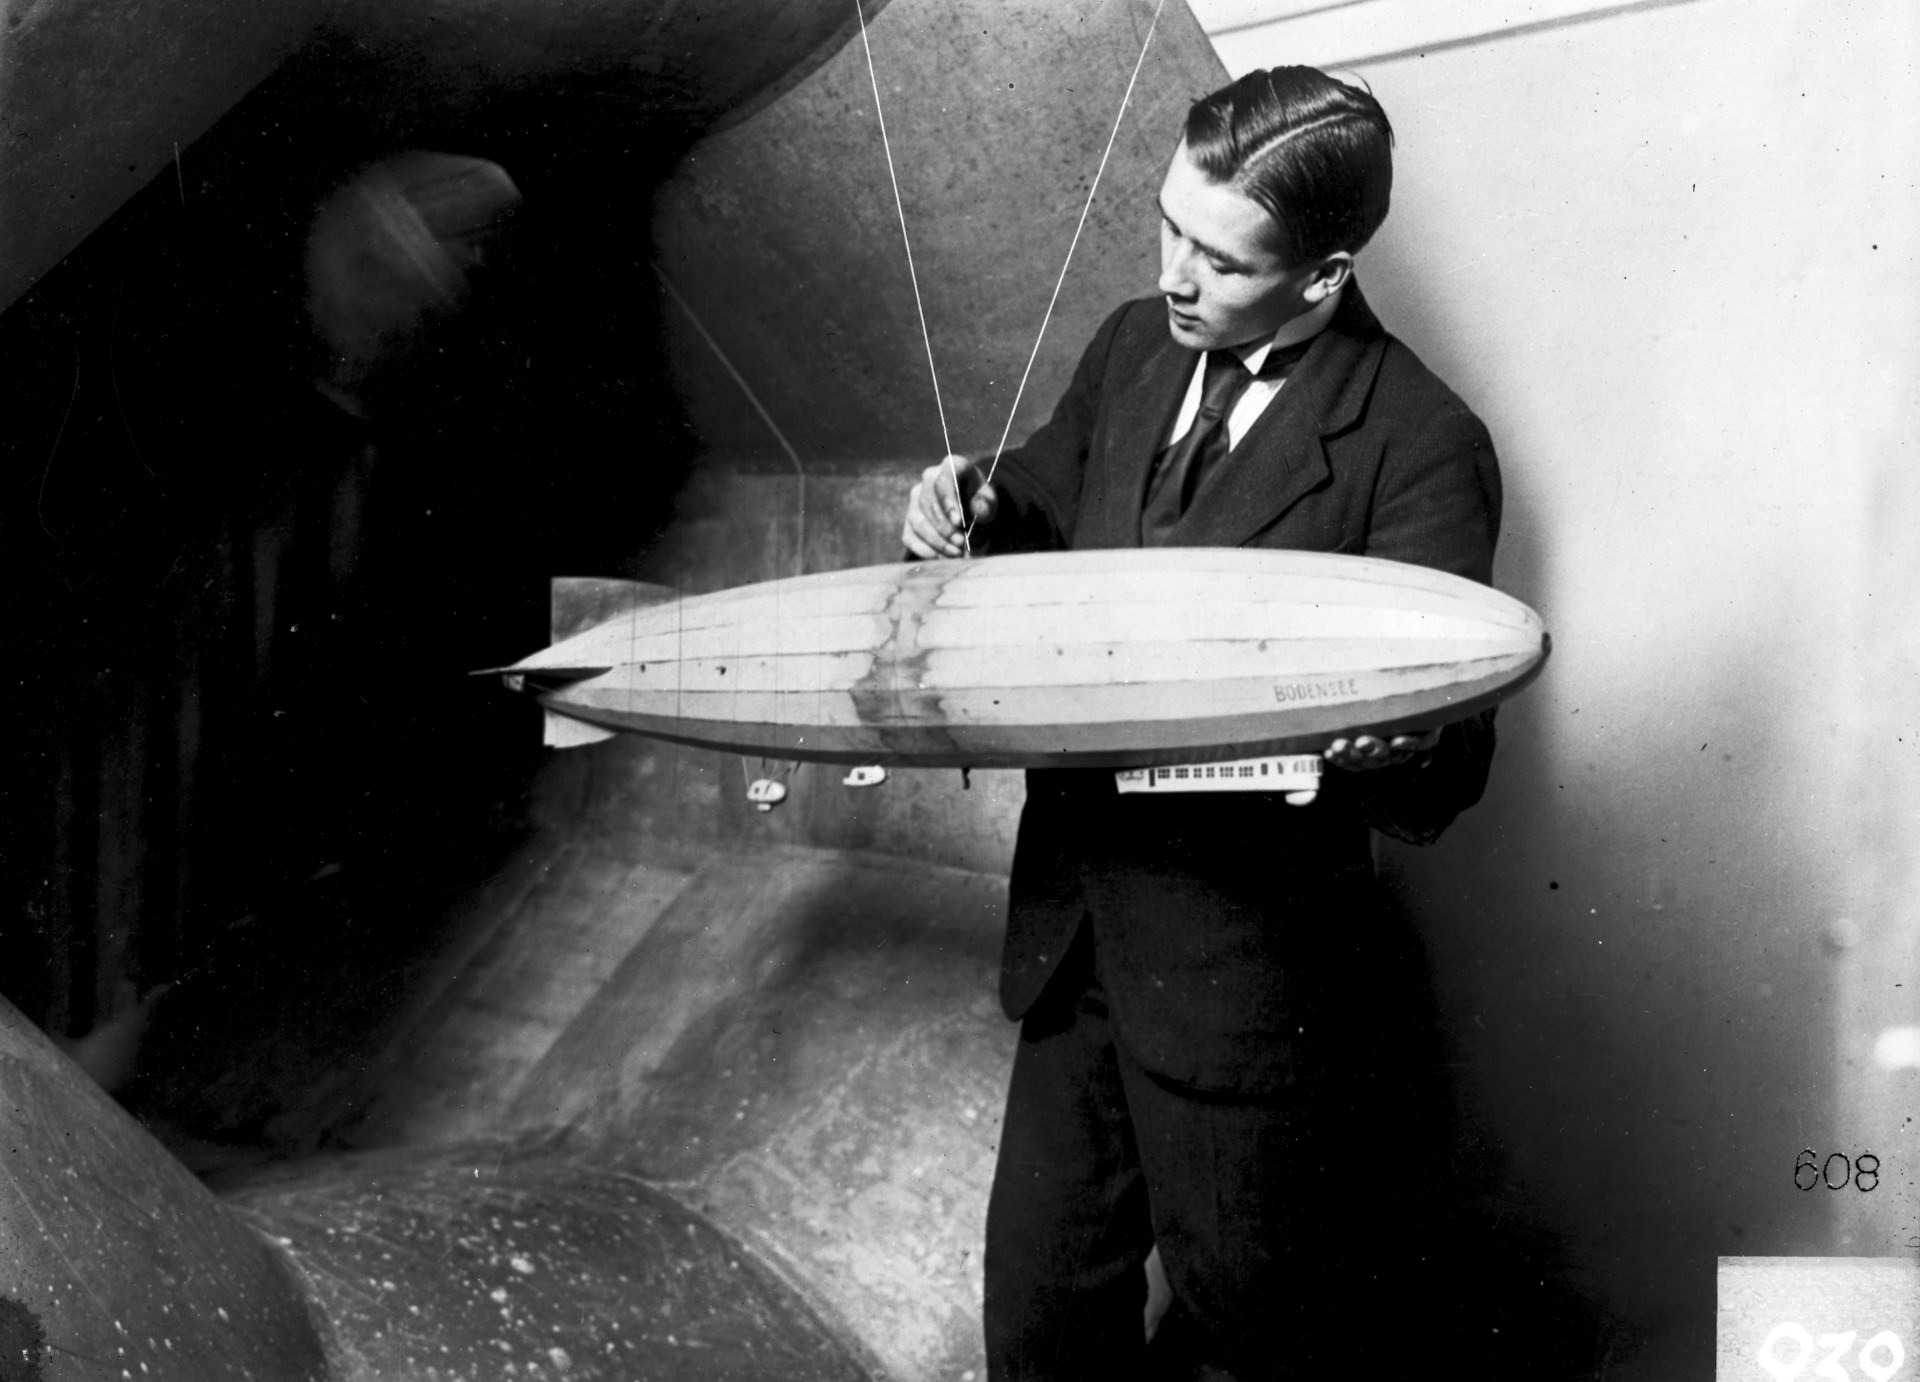 Model of the Bodensee airship in the small wind tunnel at the Aerodynamic Research Institute